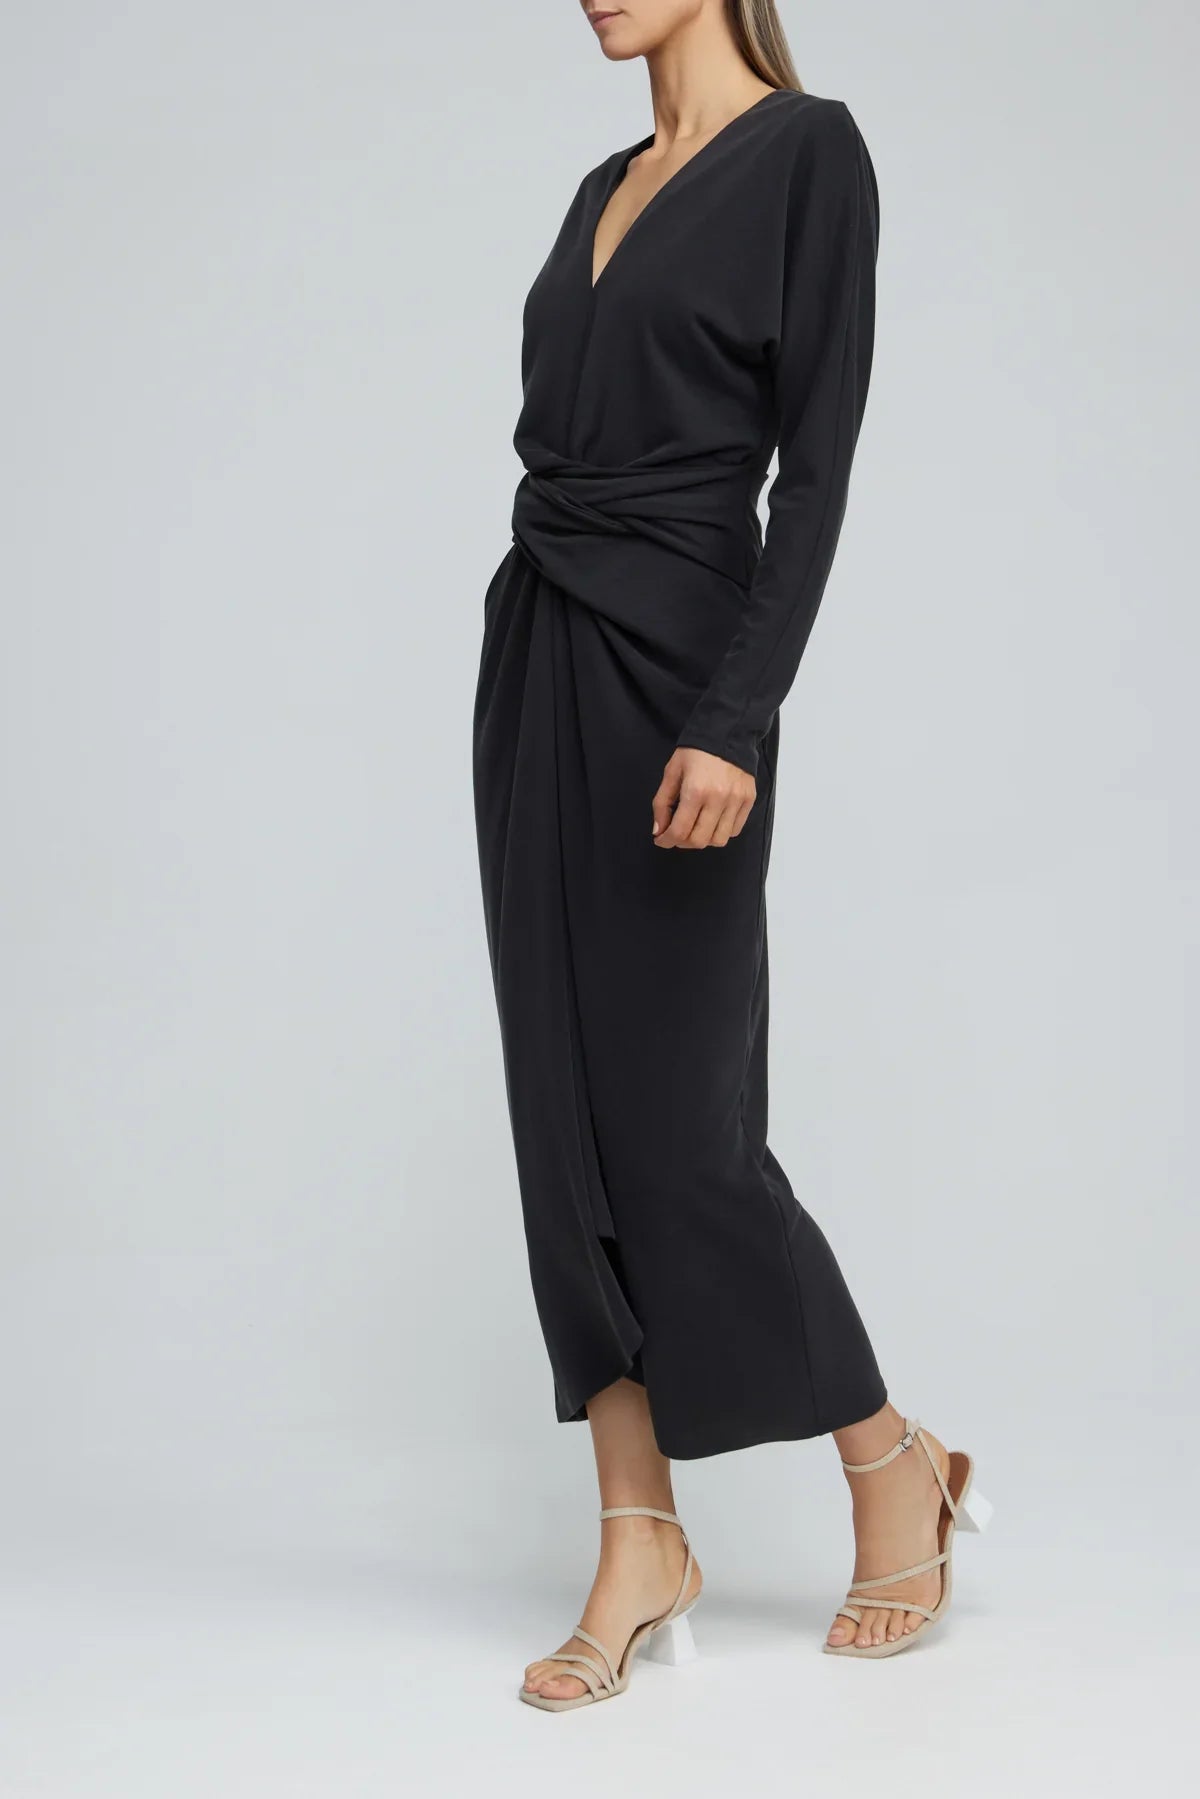 ACLER CARLINGFORD DRESS - Bread Boutique  - asymmetrical, charcoal, dress, flowy, GLAMOROUS, LONG SLEEVED, loose fit, pleated, SEXY, shiny, SOFT, SOPHISTICATED, STRETCHY, STUNNING, WAISTED - Darwin boutique - Darwin fashion